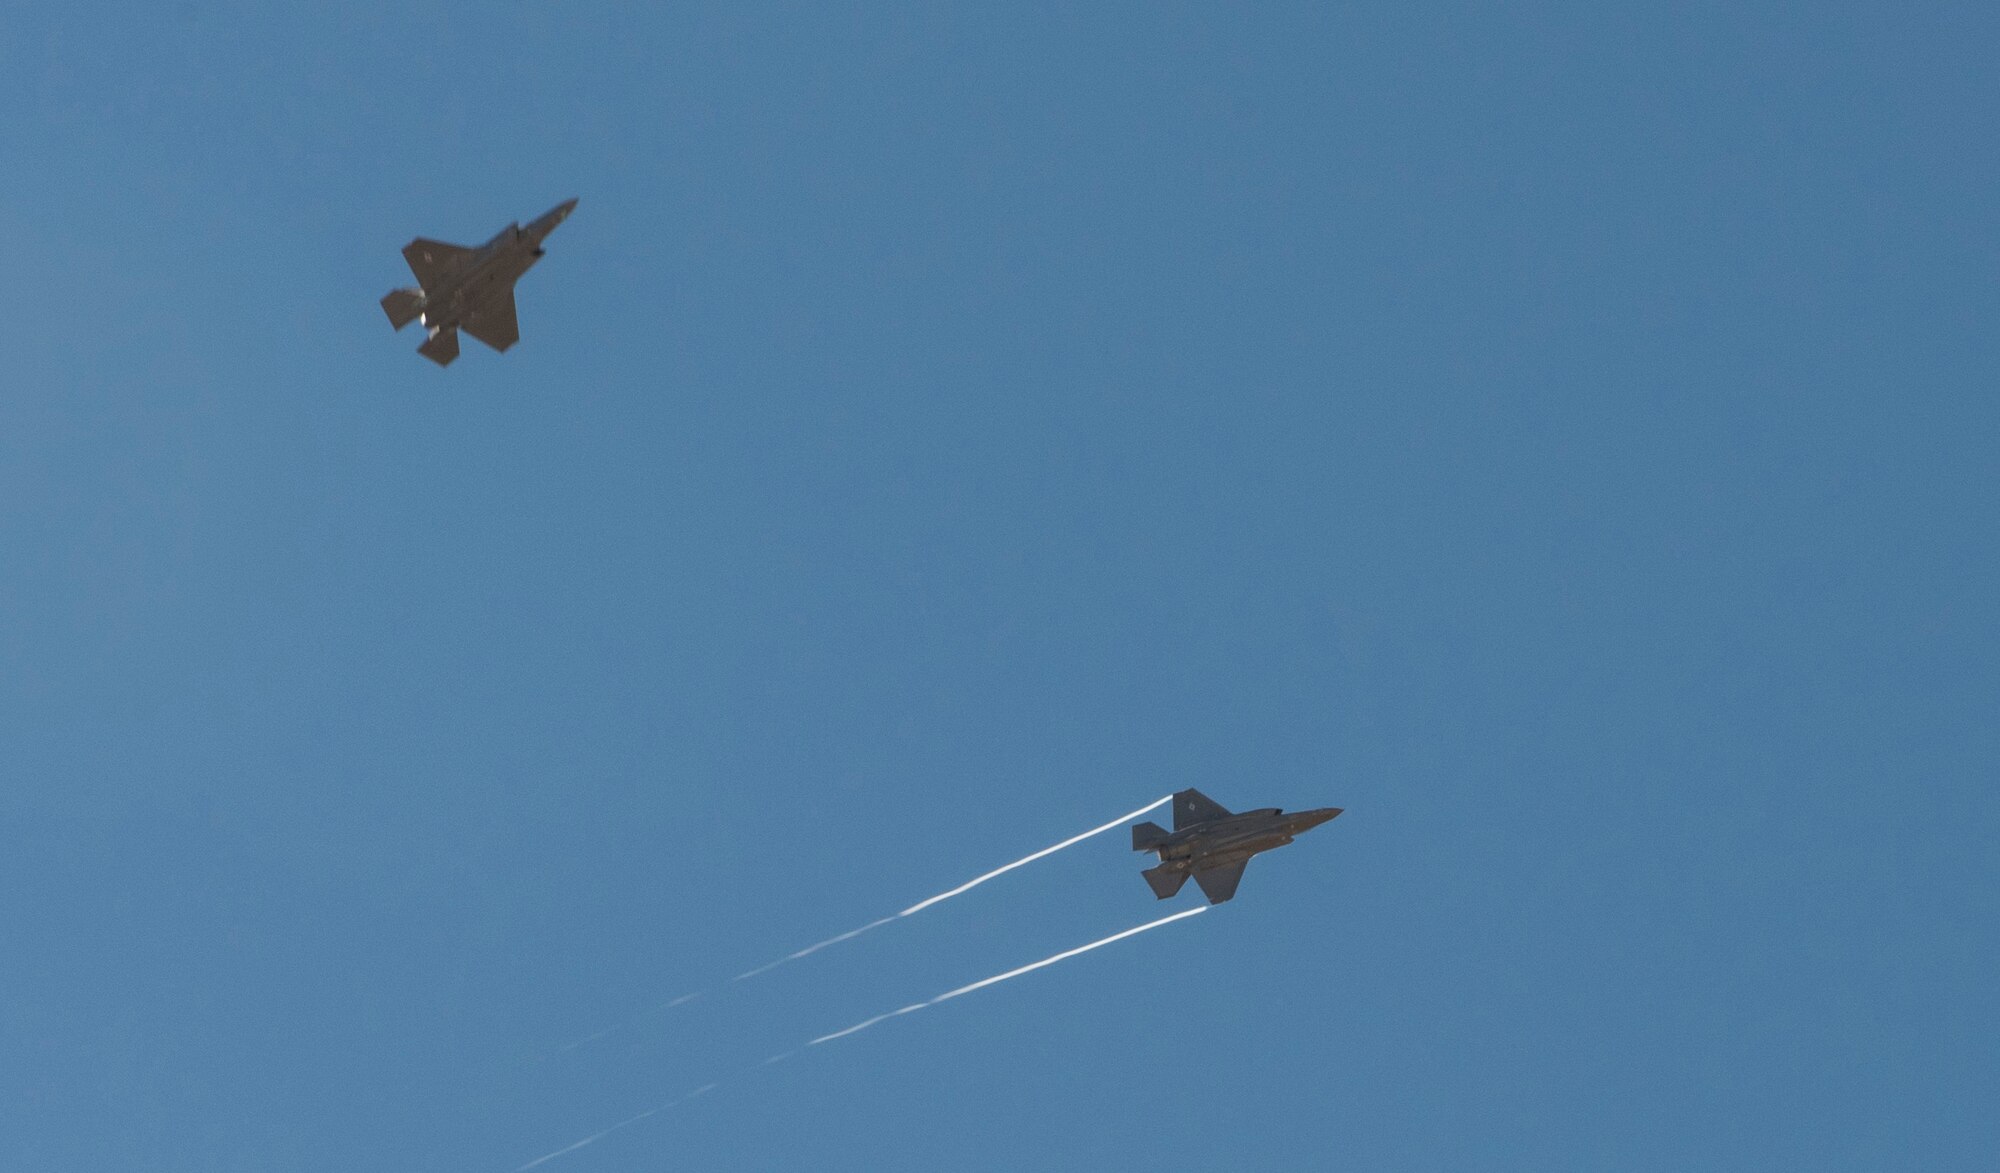 An F-35A separates from formation to land at Mountain Home Air Force Base, Idaho, June 3, 2016. Mountain Home AFB's airspace allows Hill Air Force Base's active duty 388th Fighter Wing and reserve 419th Fighter Wing to fully test the aircraft in preparations for declaring initial operational capability later this year. (U.S. Air Force photo by Airman Alaysia Berry/Released)